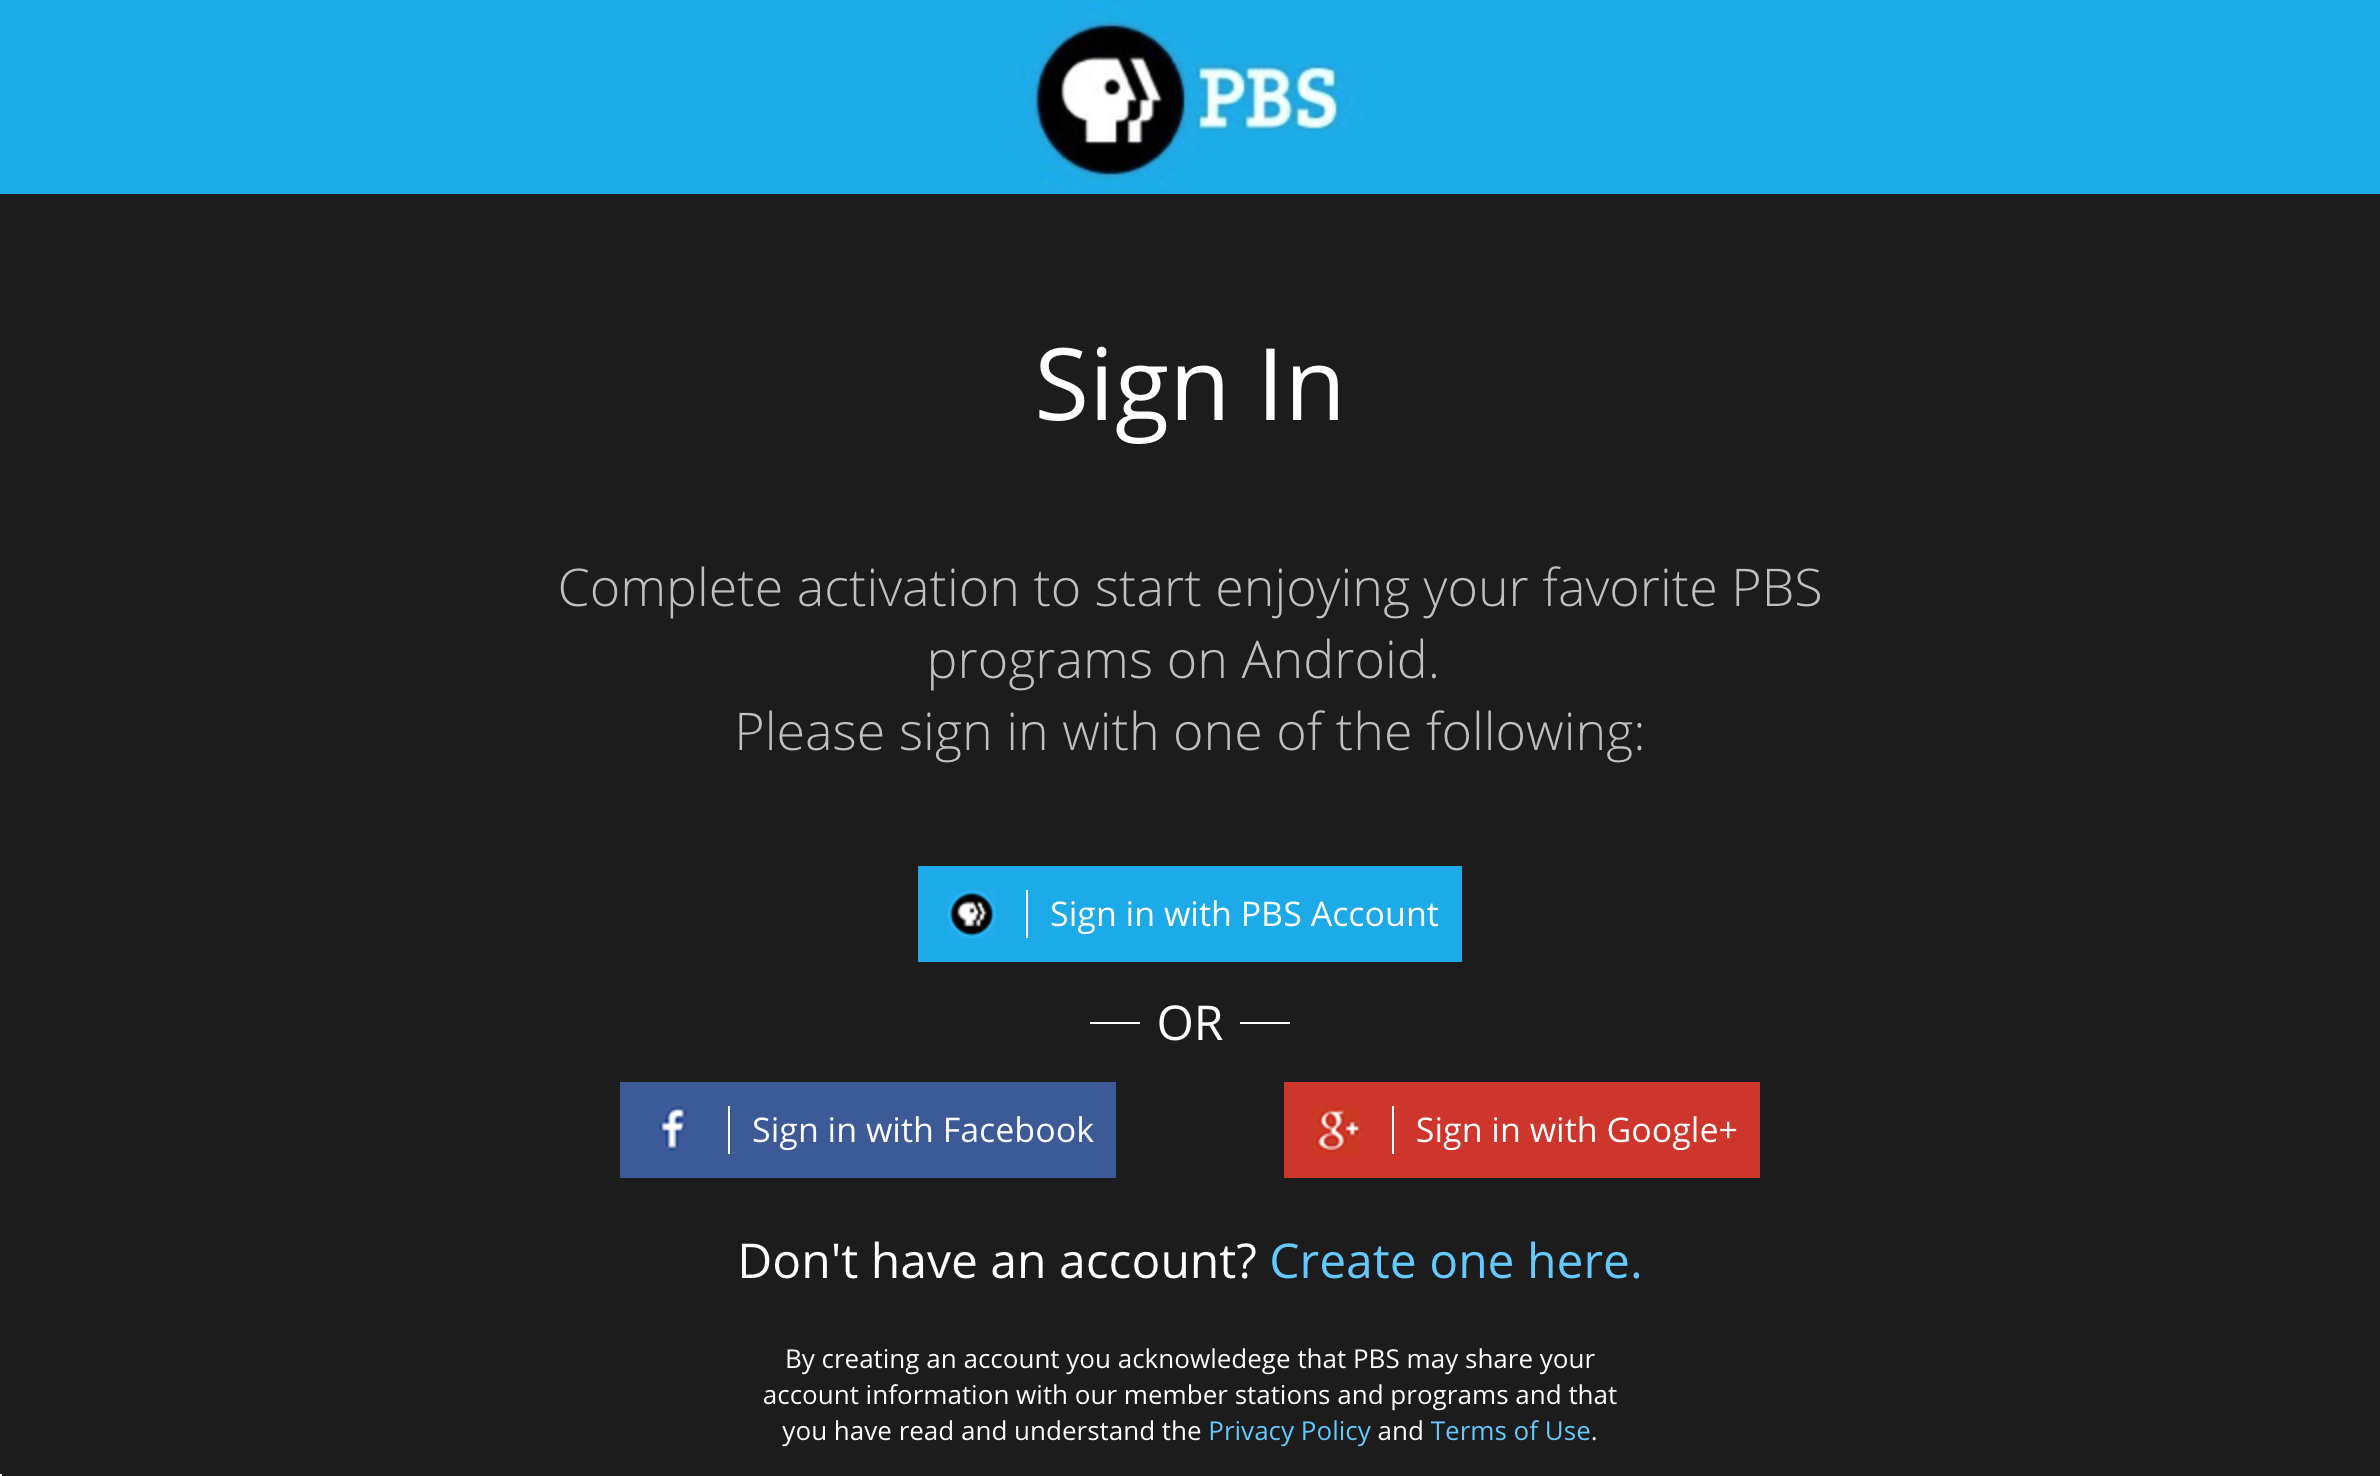 Sign in to your PBS account